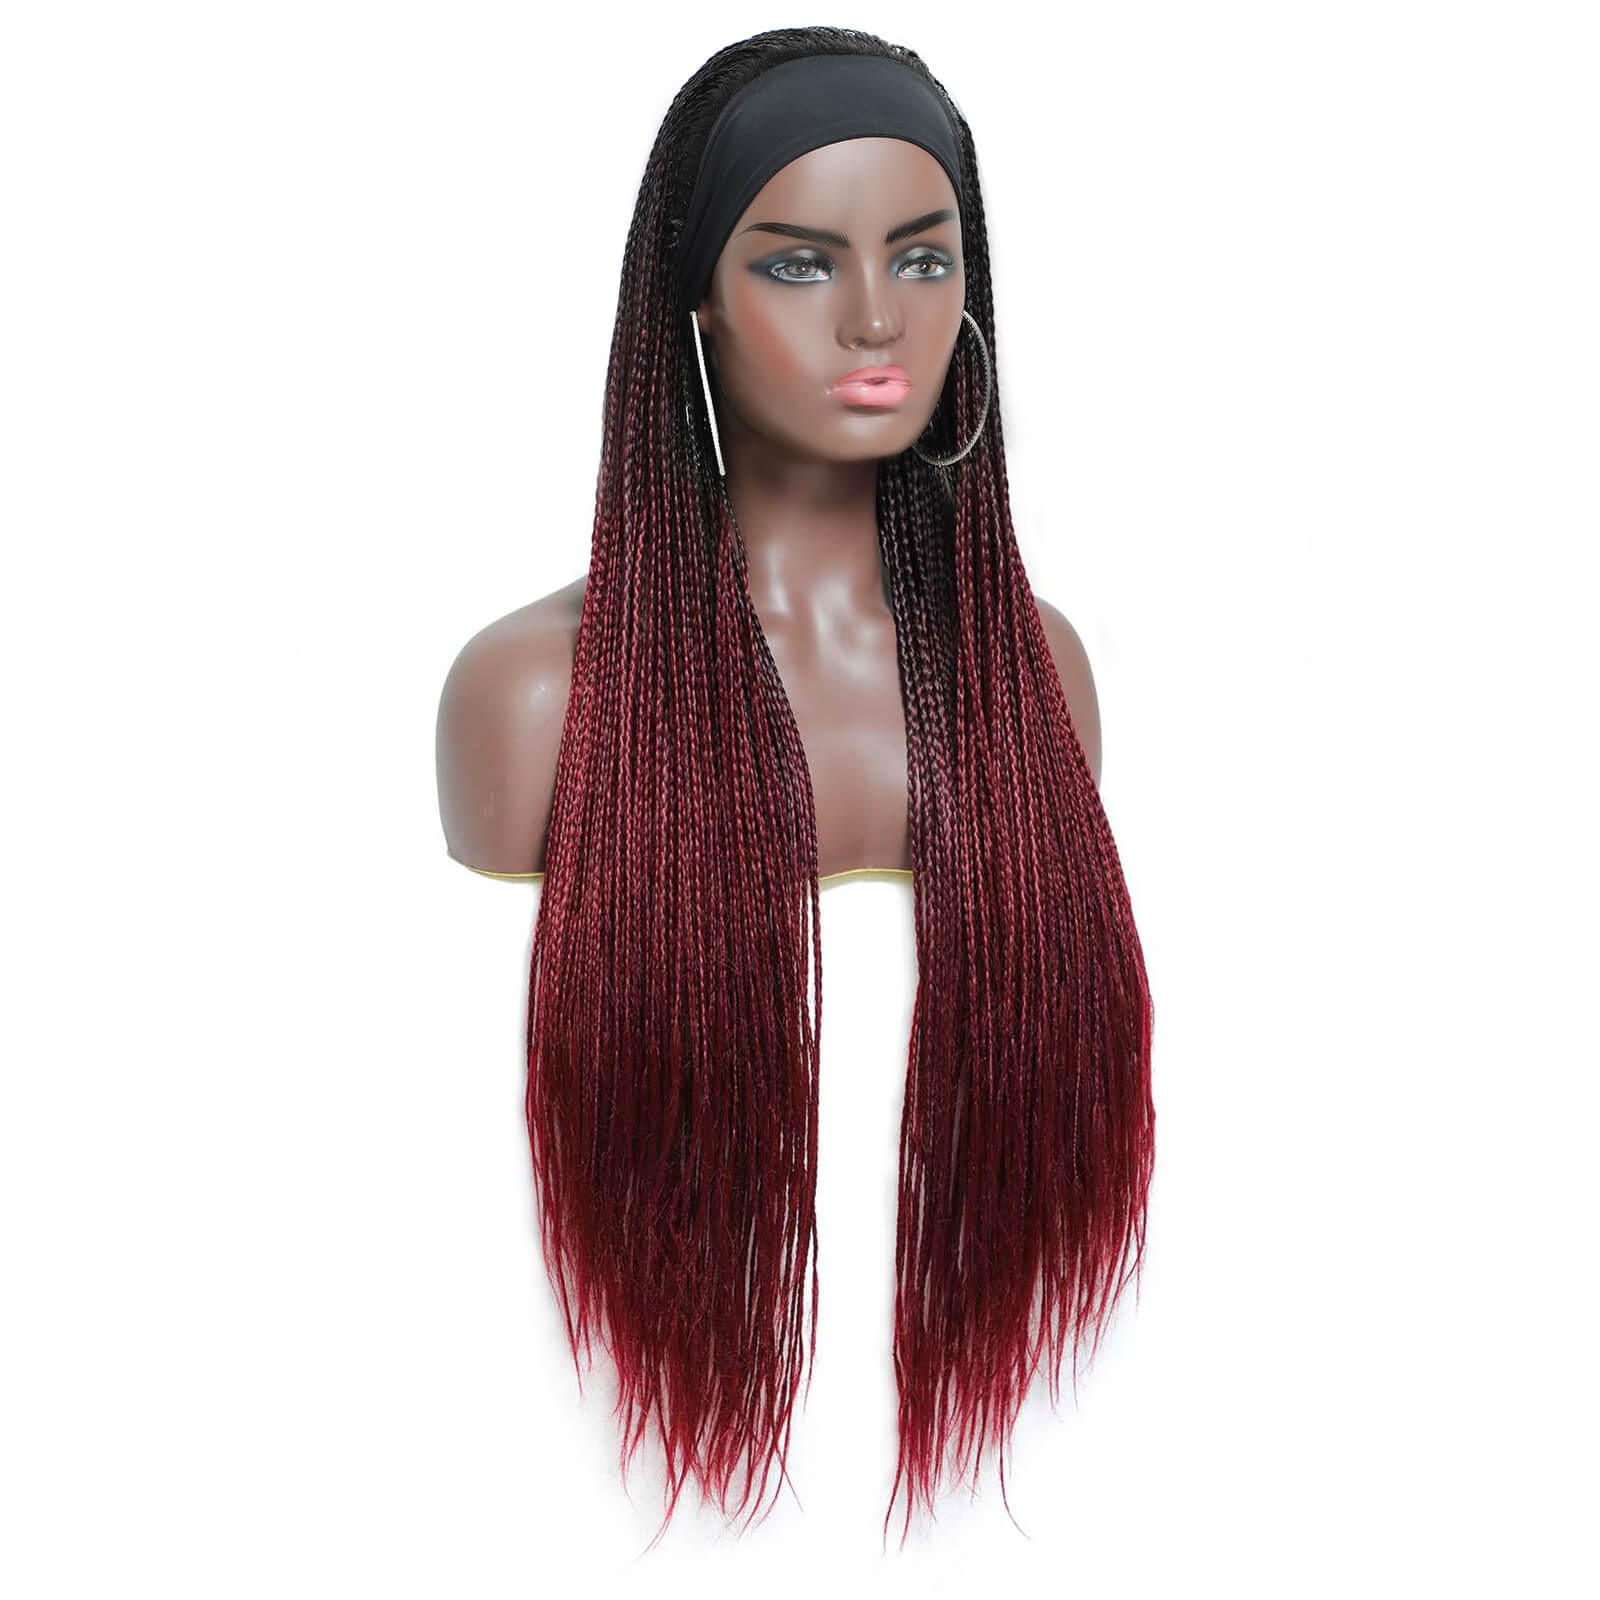 Long Braided Ombre Black Burgundy Highlight Synthetic Adjustable